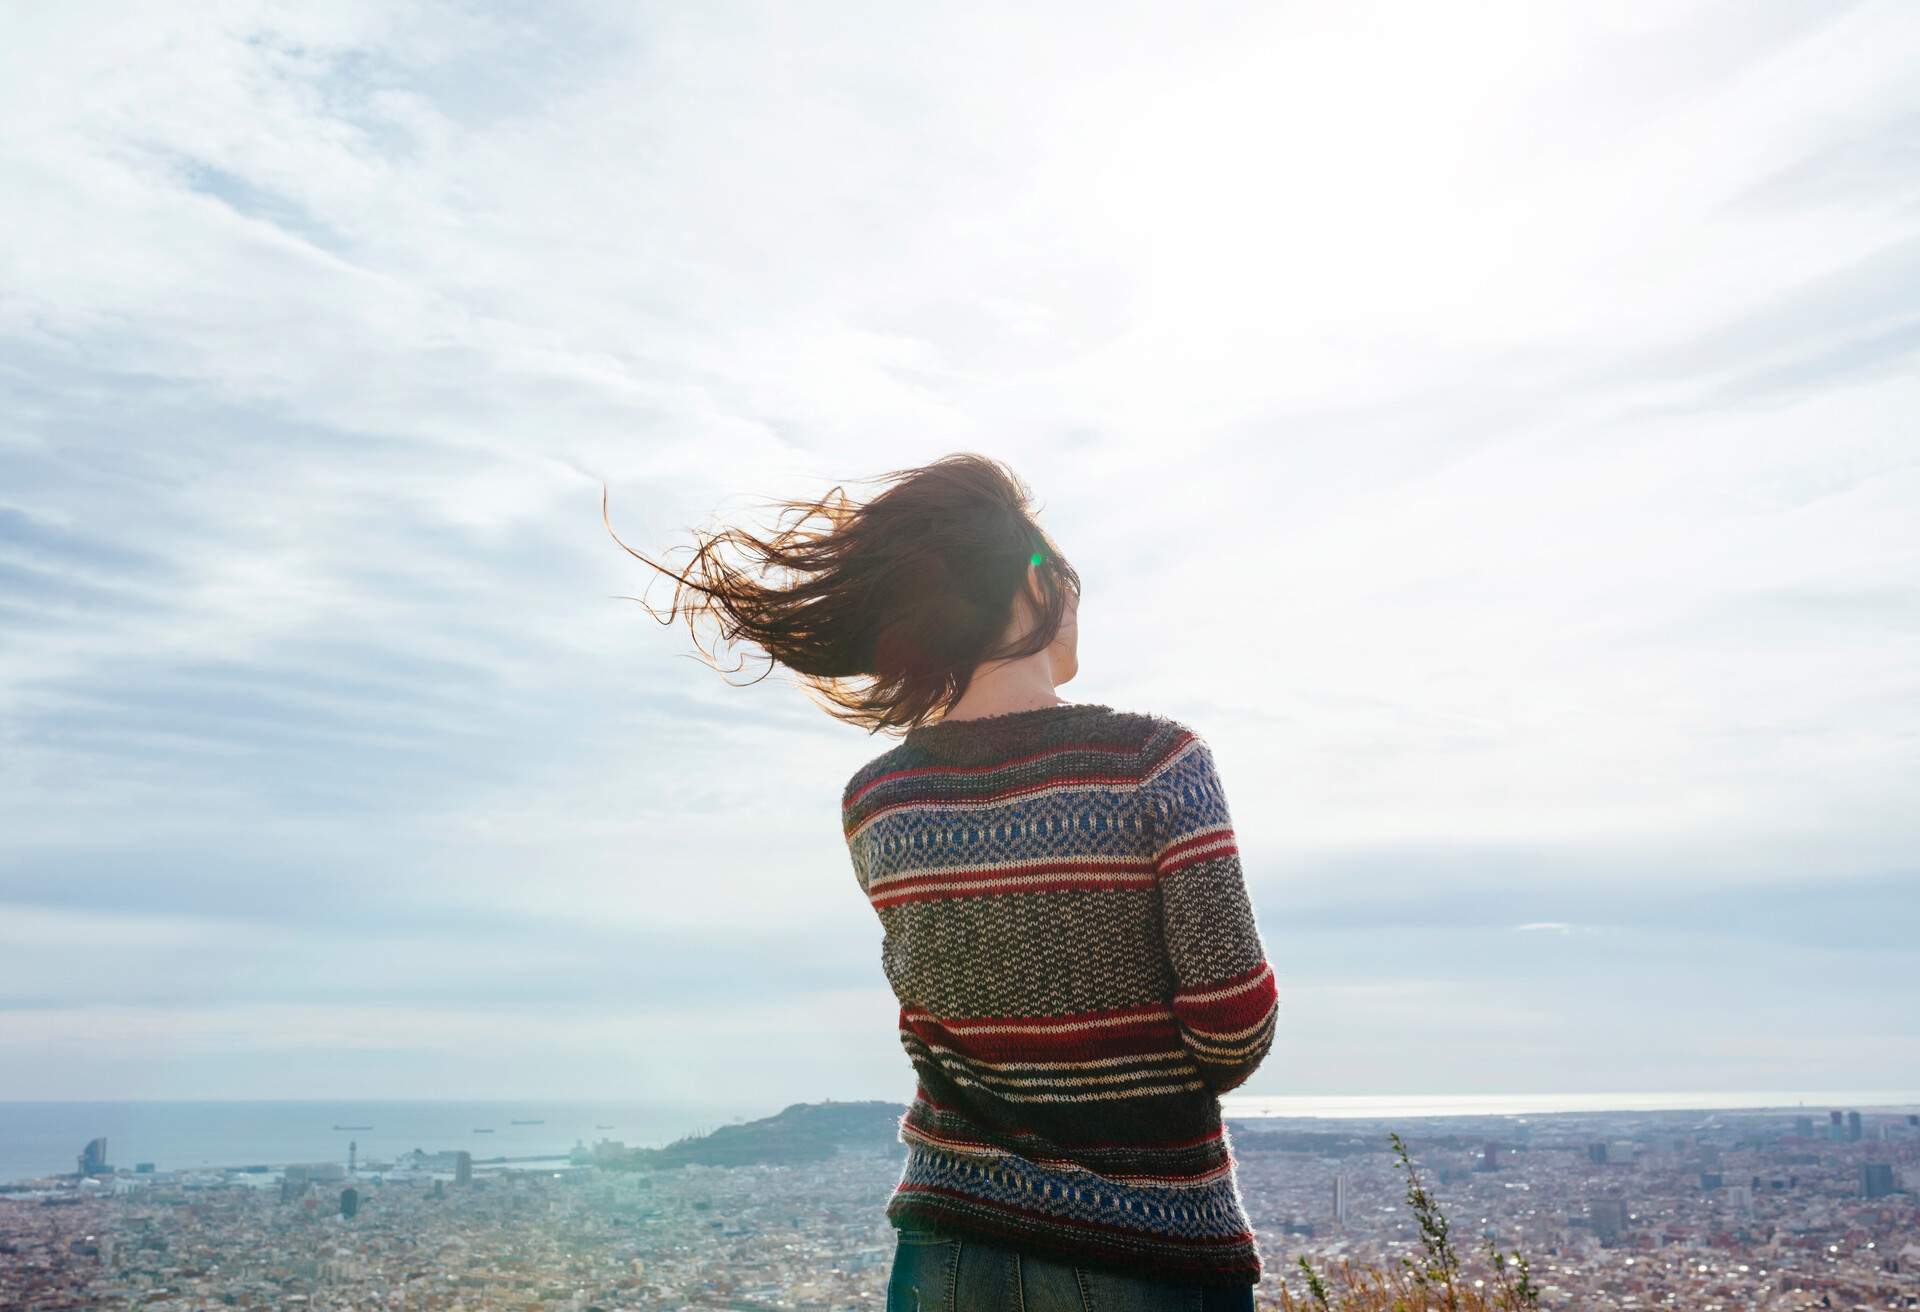 A woman enjoying the views of the city from a windy viewpoint.